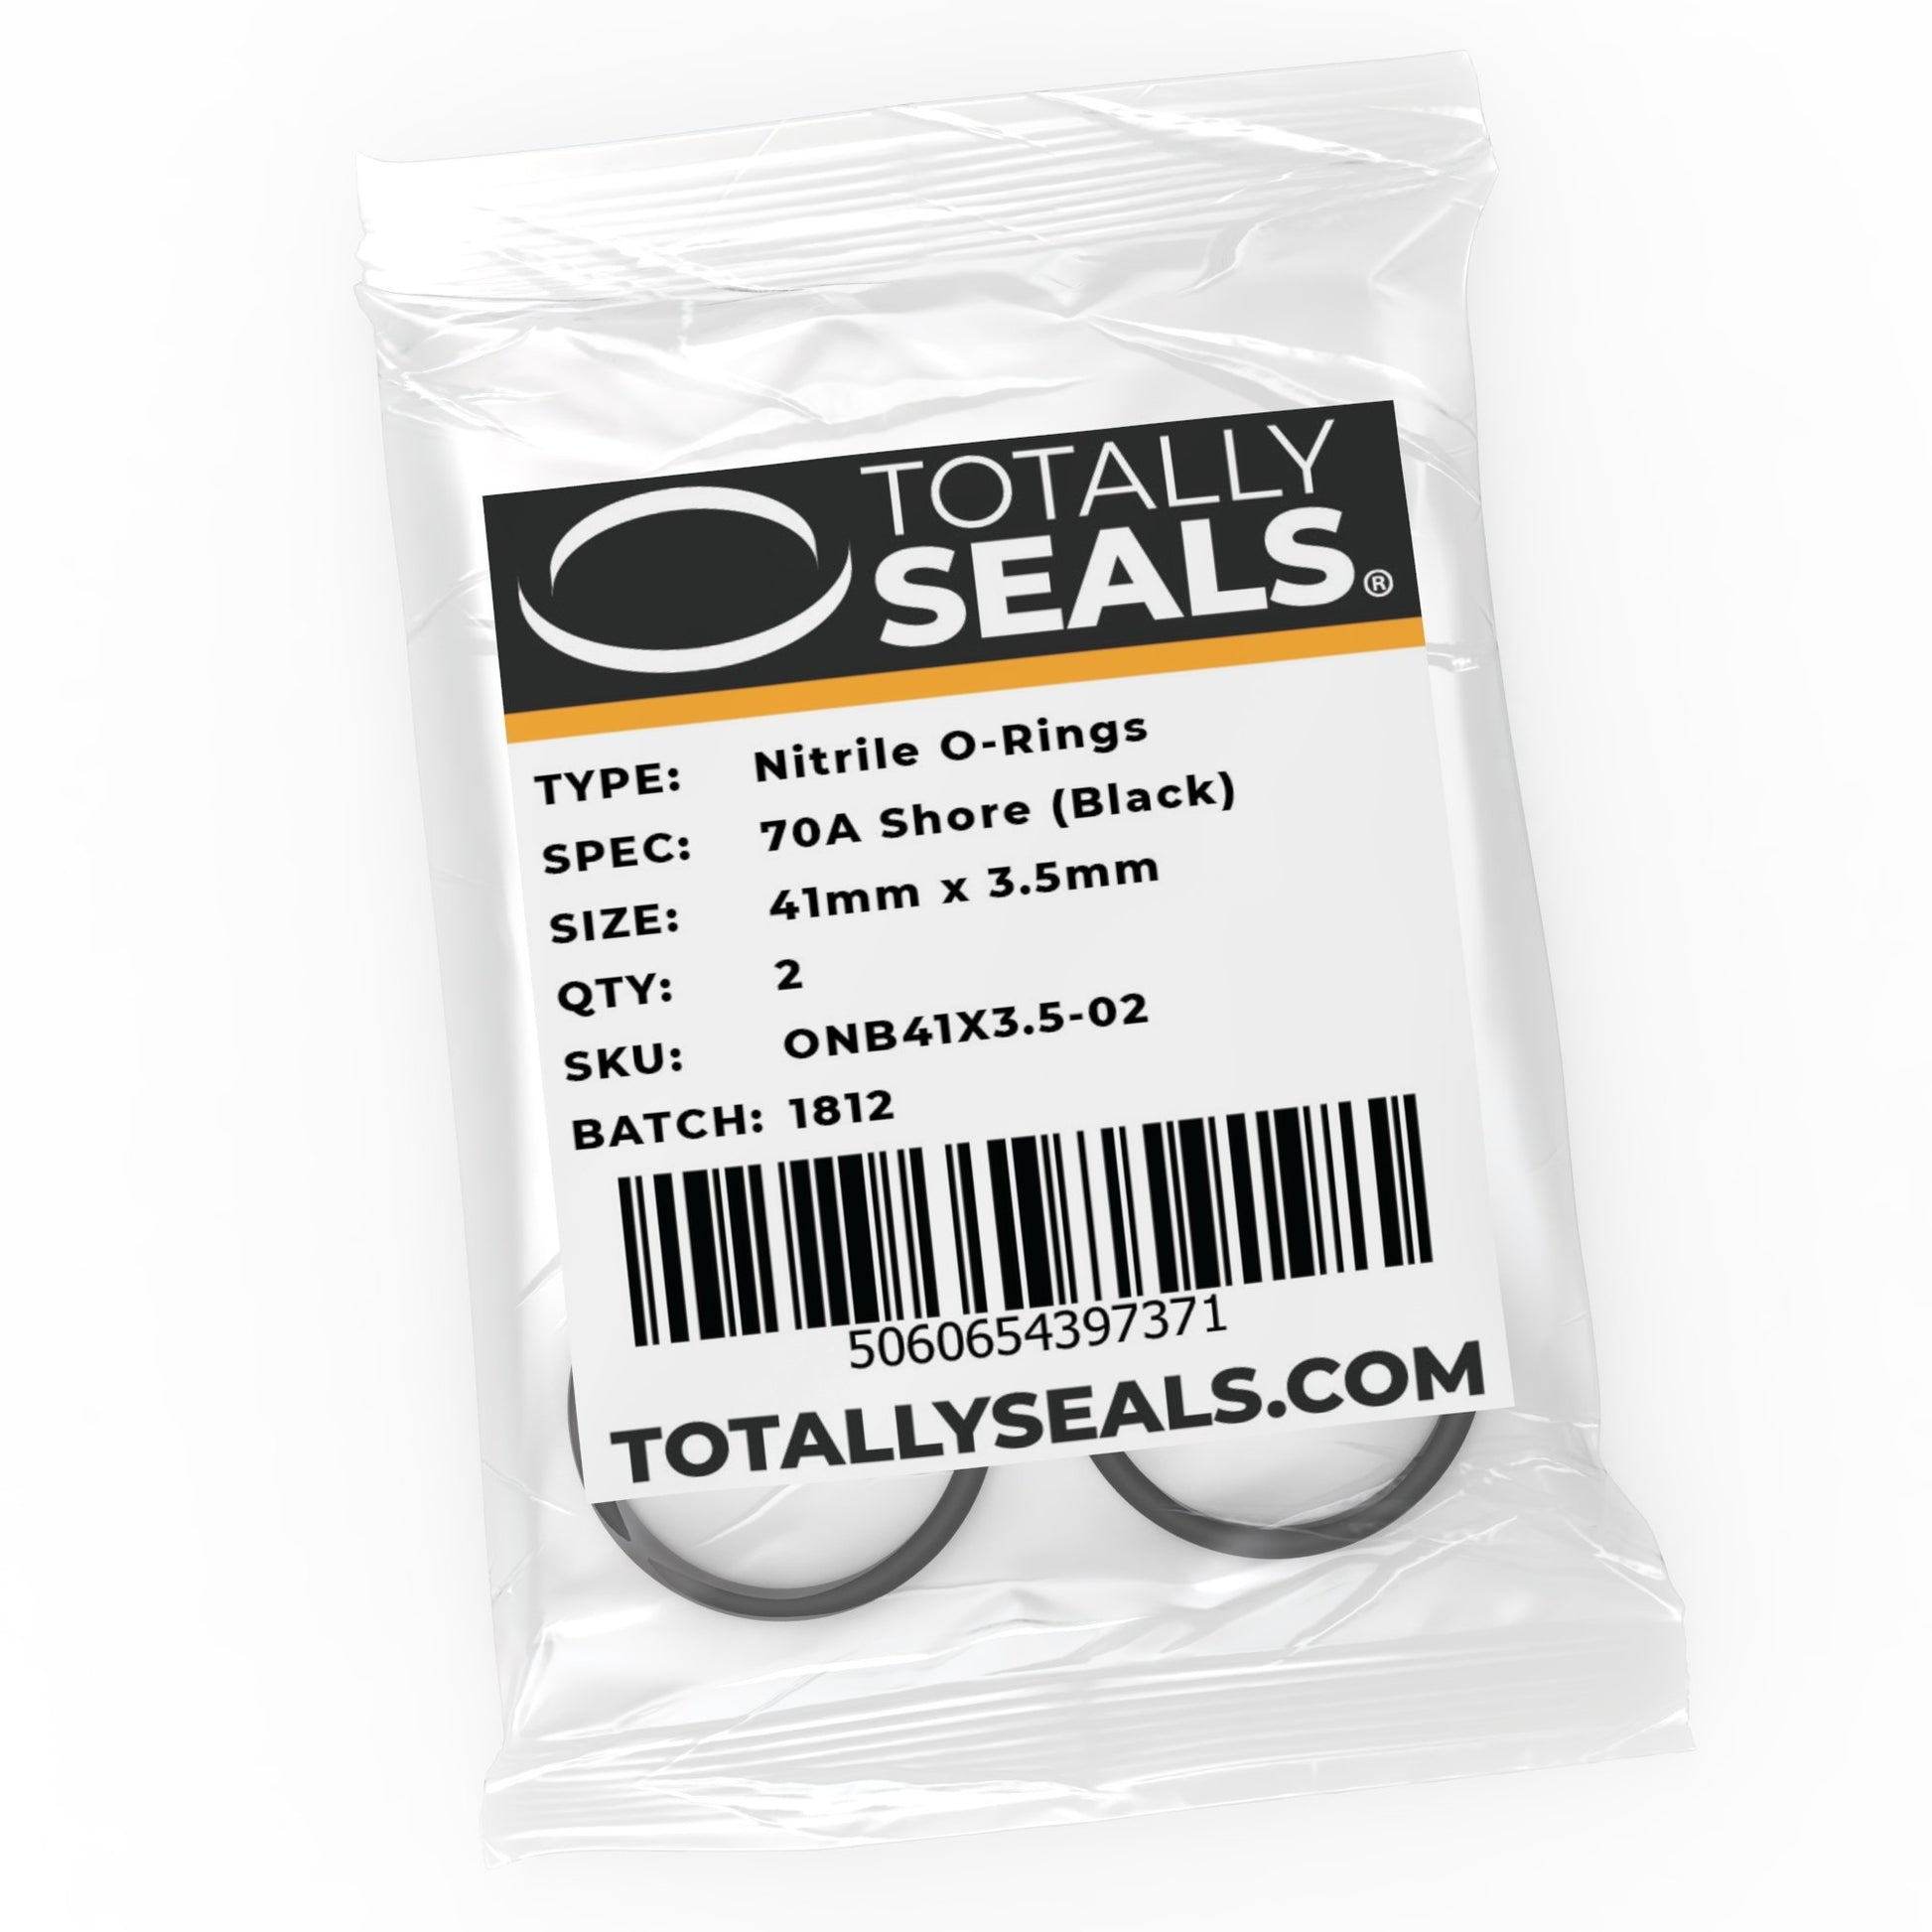 41mm x 3.5mm (48mm OD) Nitrile O-Rings - Totally Seals®